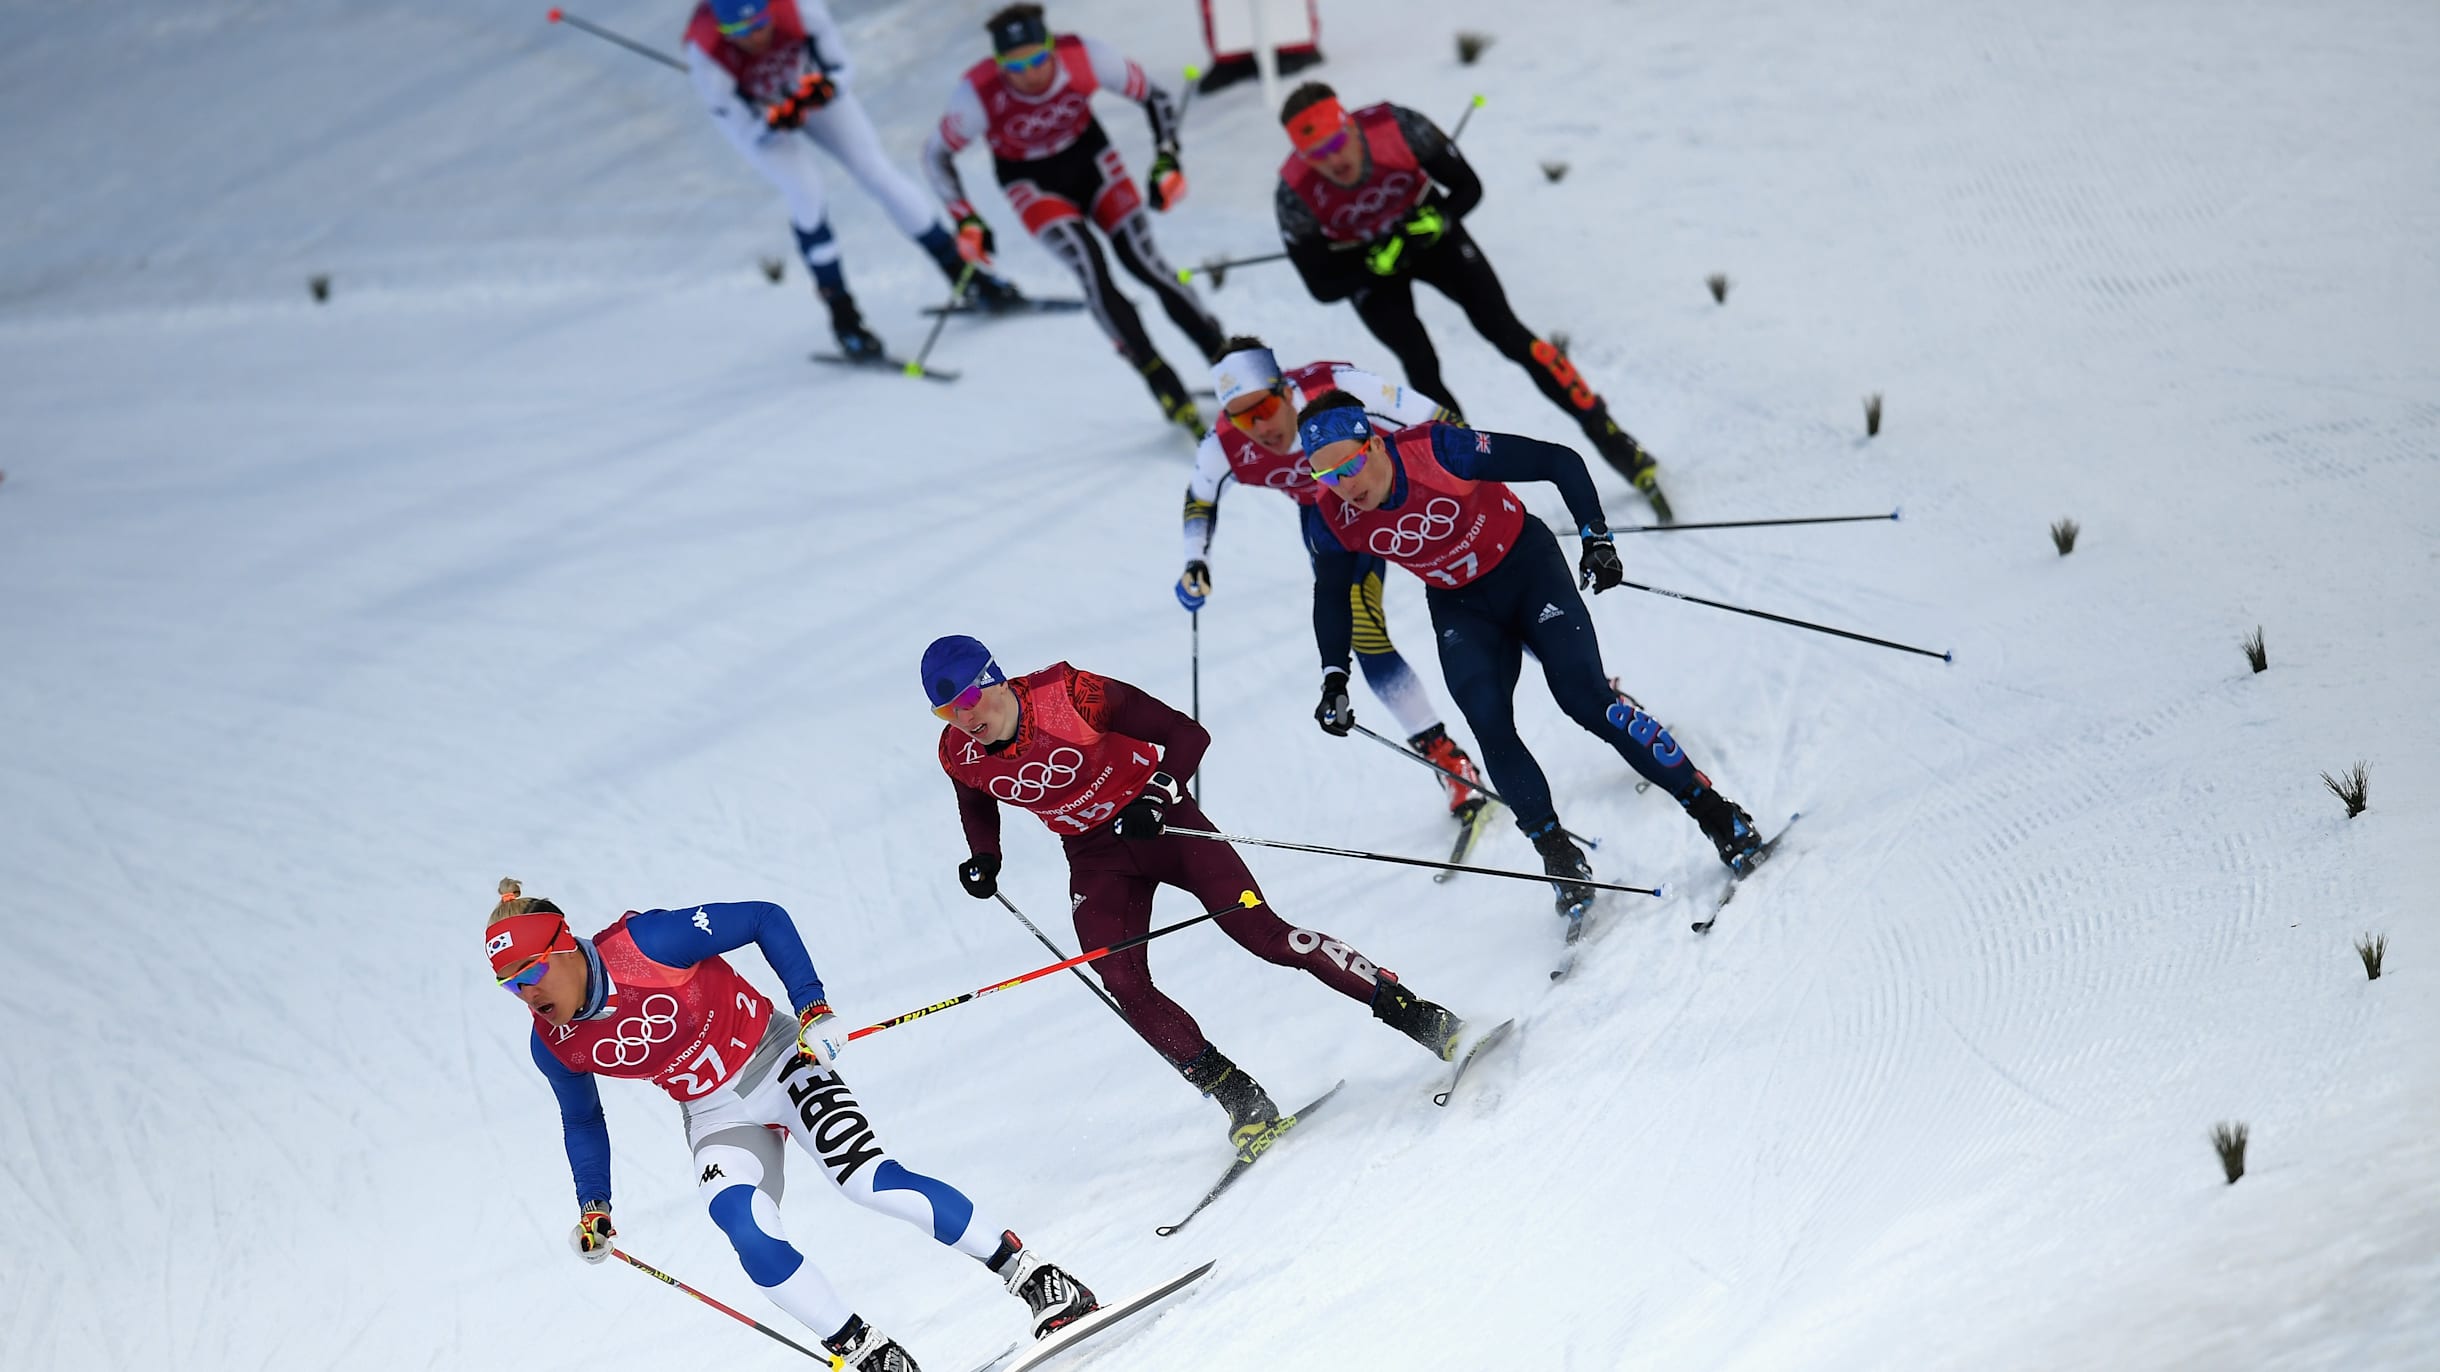 Everything you need to know about cross-country skiing at Lausanne 2020